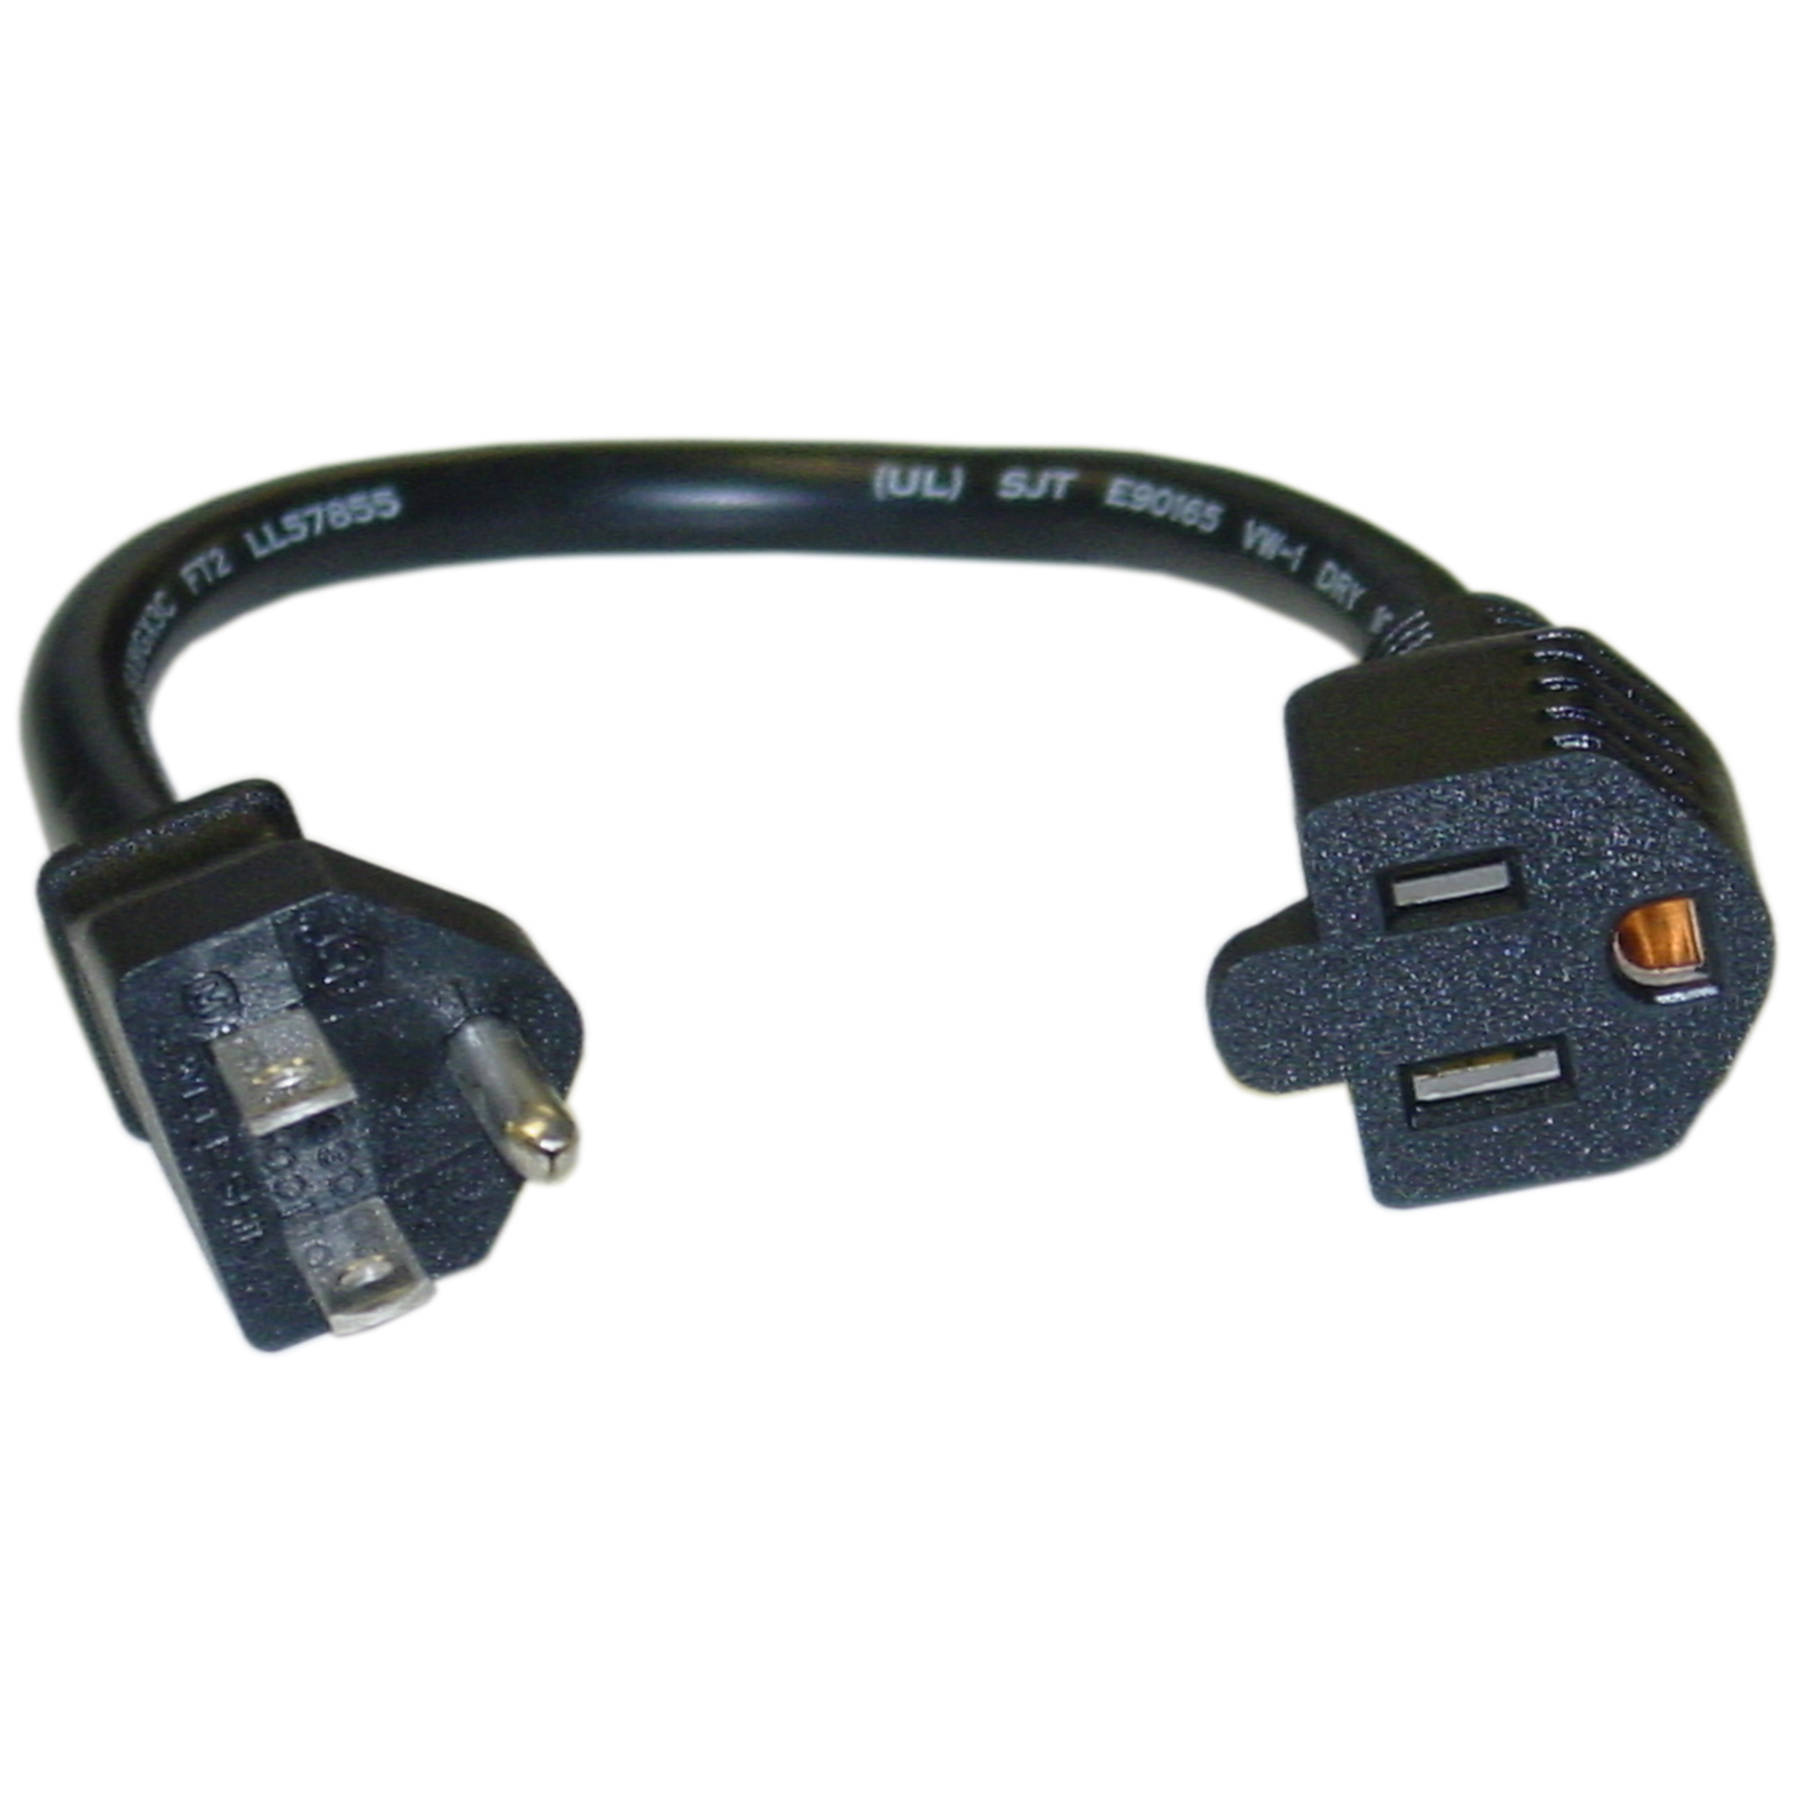 13 Amp Black clickhere2shop 15-Foot 16 AWG Offex OF-10W1-04215-16 Power Extension Cord 5-15P to NEMA 5-15R 